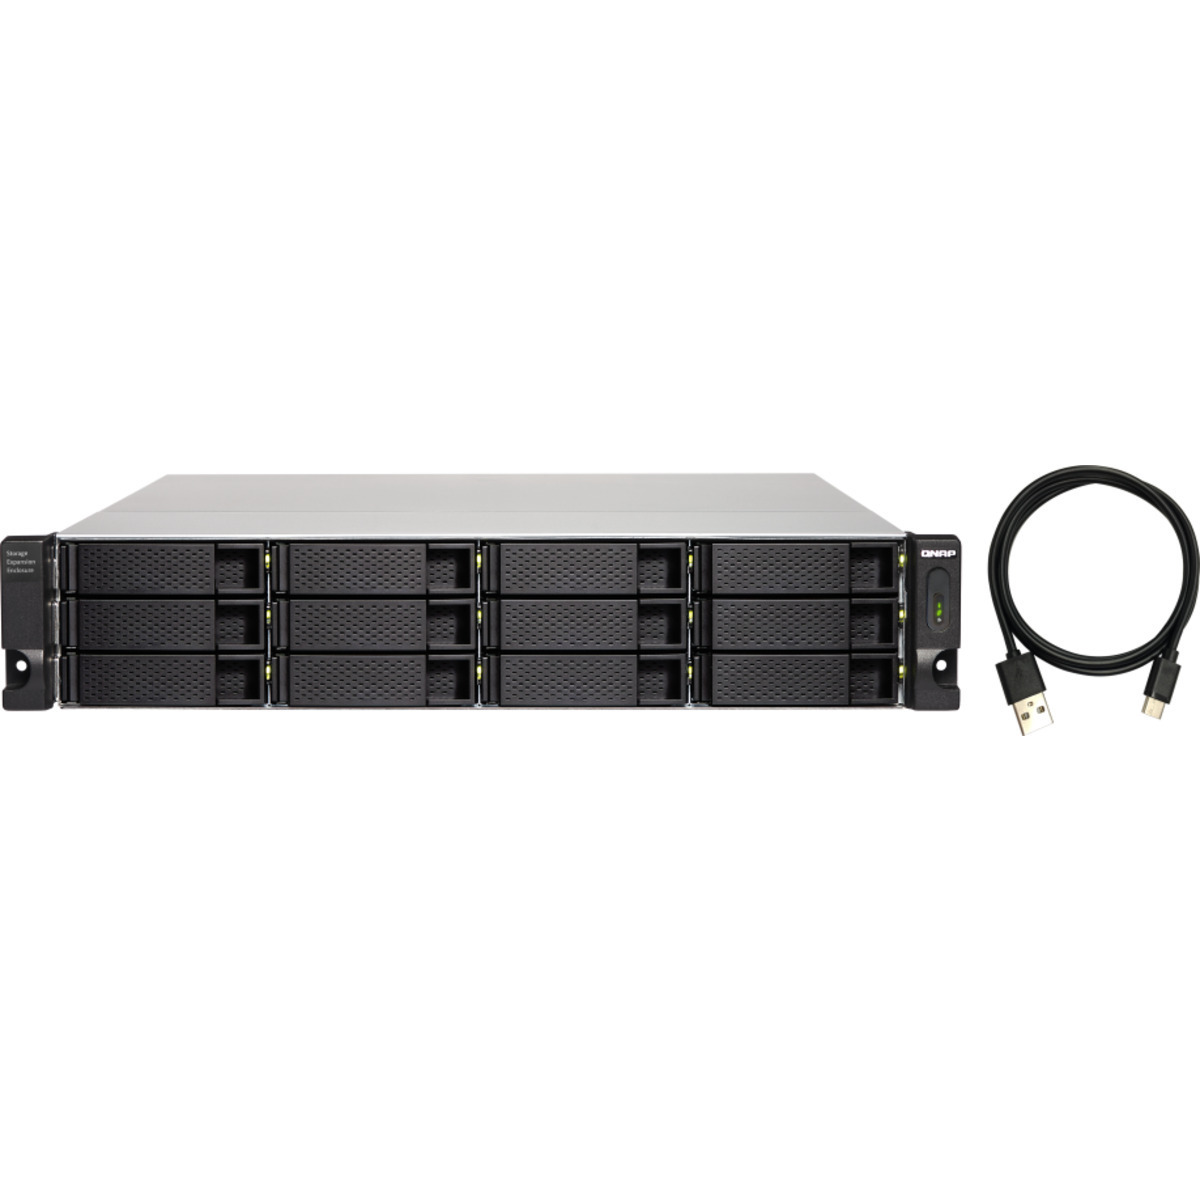 QNAP TL-R1200C-RP External Expansion Drive 16tb 12-Bay RackMount Multimedia / Power User / Business Expansion Enclosure 8x2tb Samsung 870 QVO MZ-77Q2T0 2.5 560/530MB/s SATA 6Gb/s SSD CONSUMER Class Drives Installed - Burn-In Tested TL-R1200C-RP External Expansion Drive